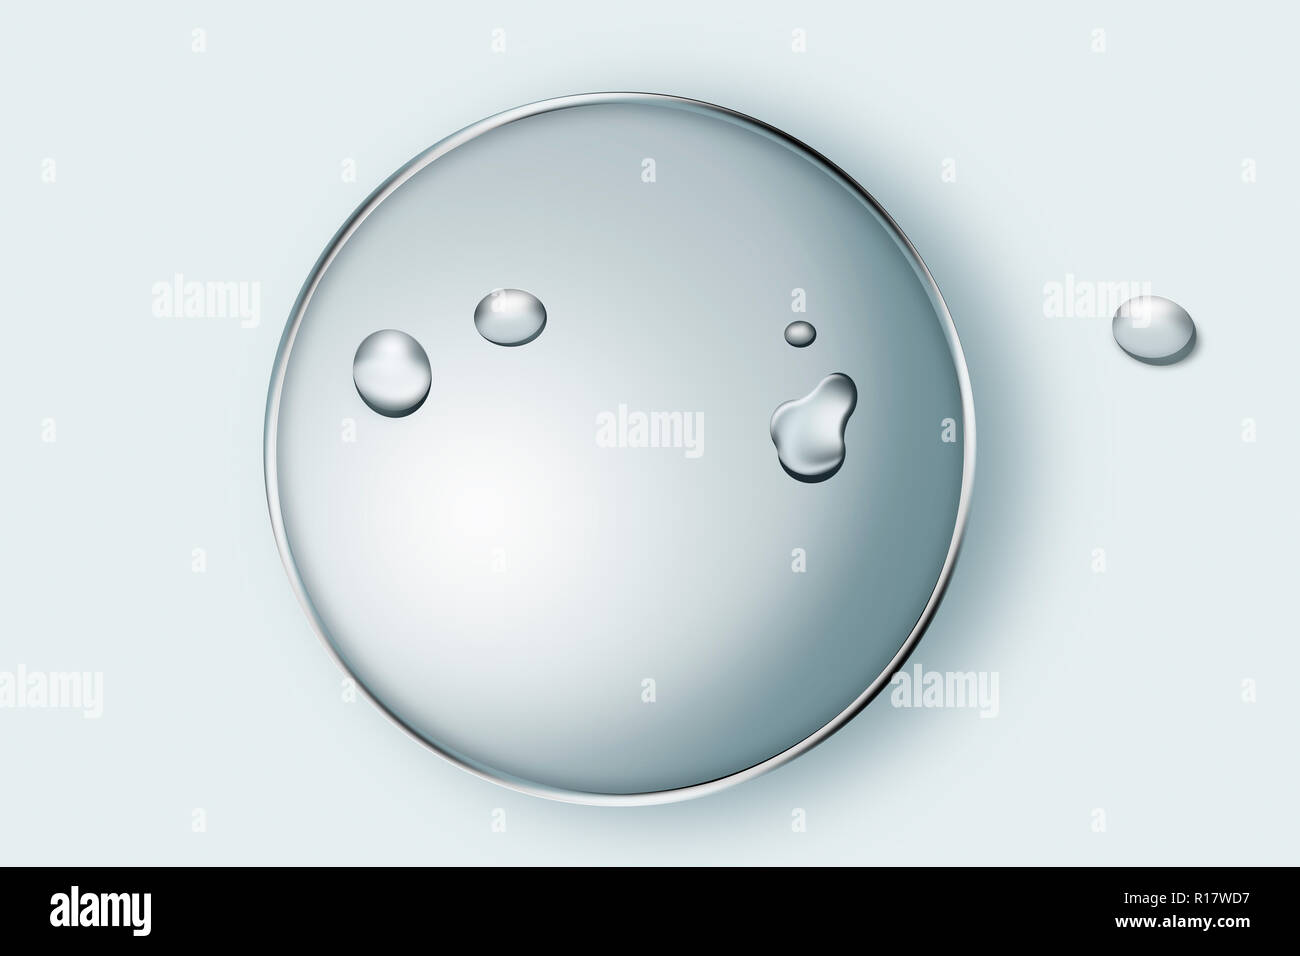 Water droplets on glass dish with silver rim, plain background, digital image Stock Photo